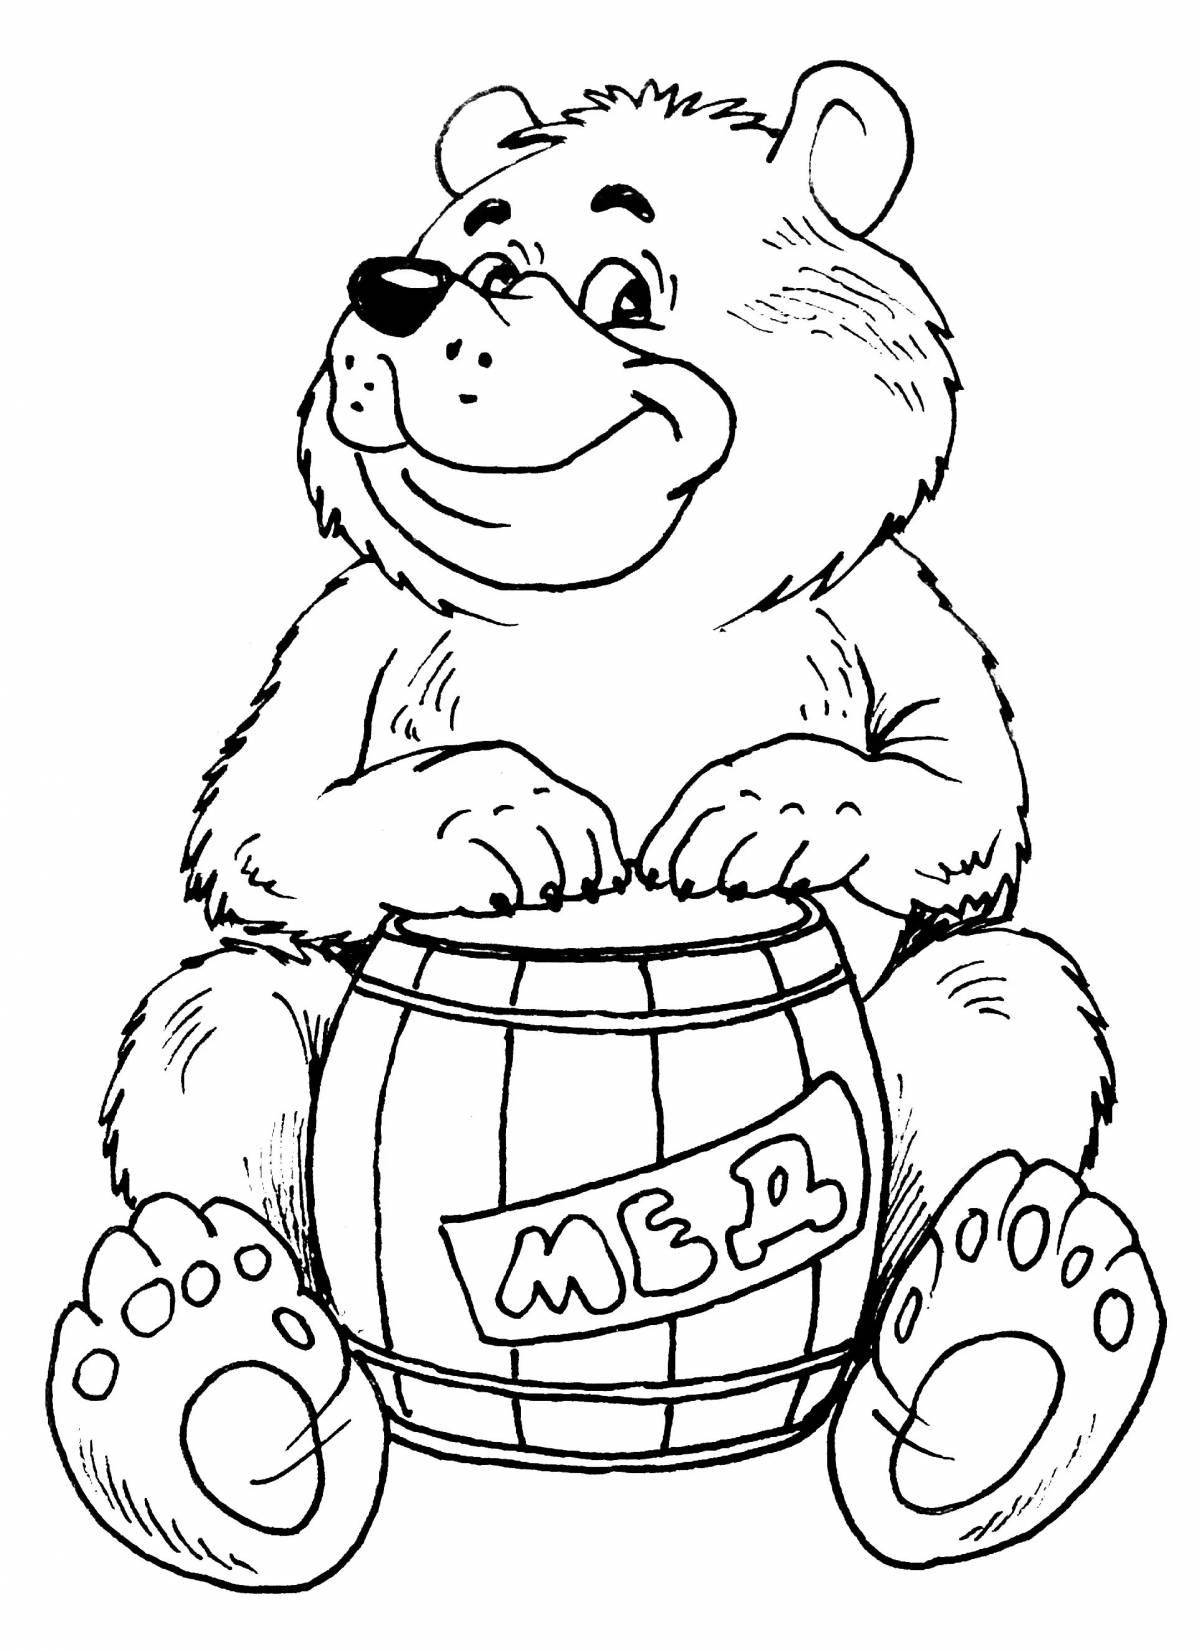 Coloring book mischievous bear with honey